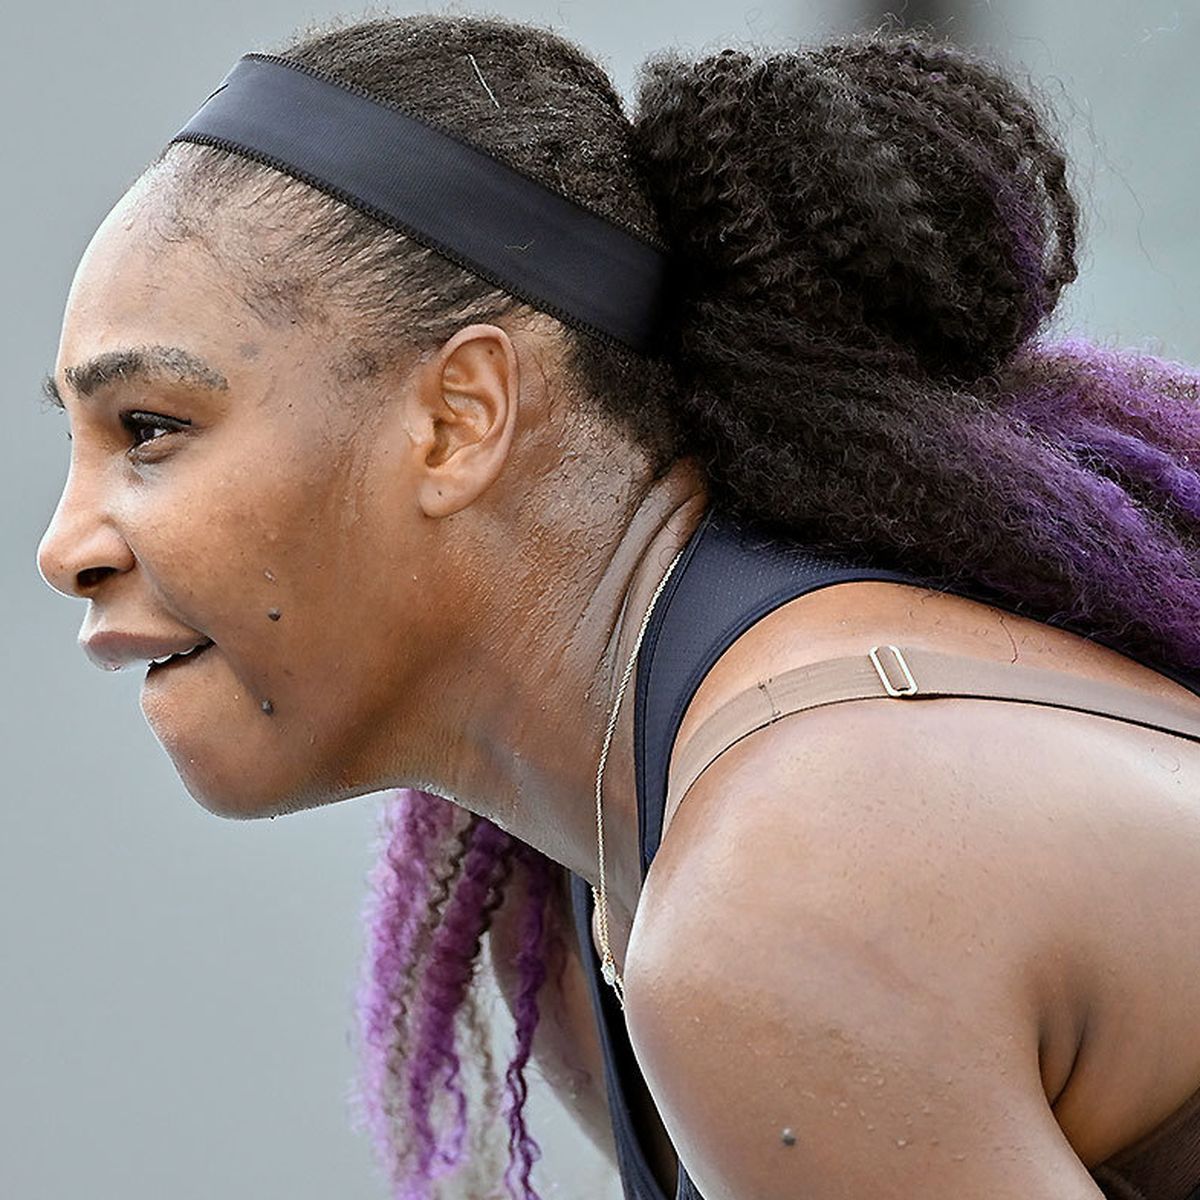 Serena Williams stunned by Shelby Rogers at Top Seed Open